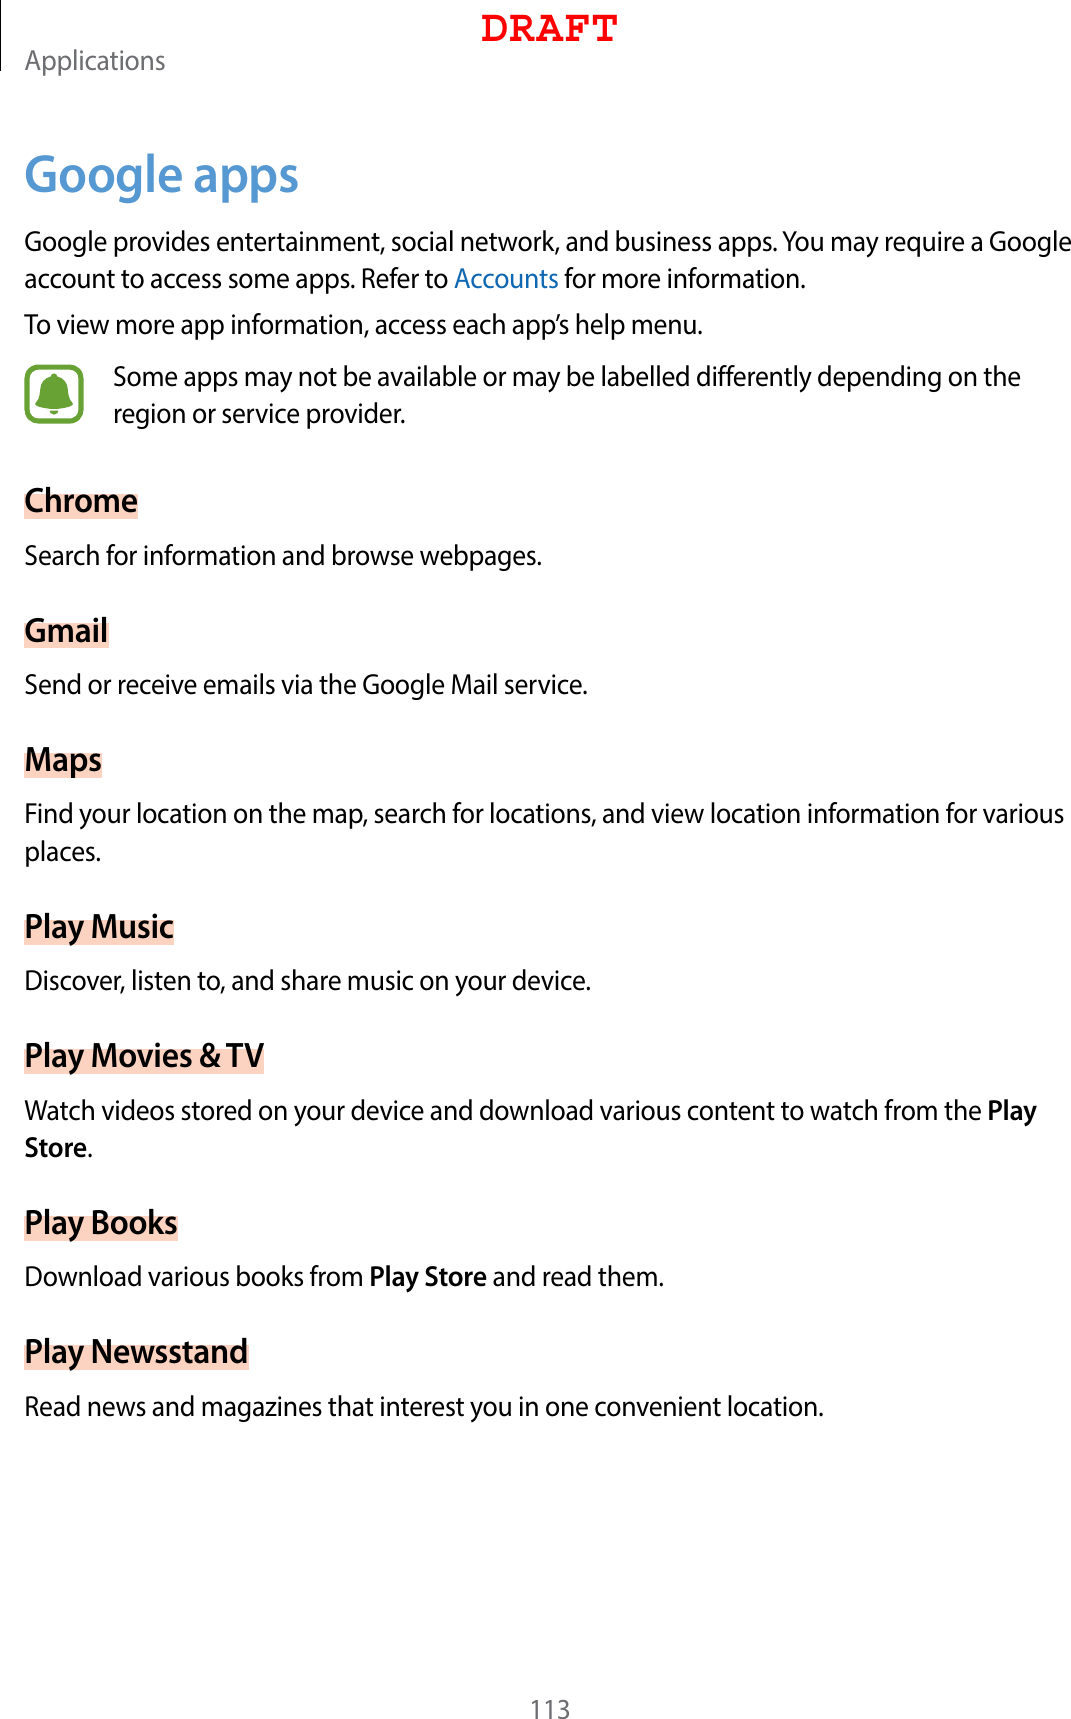 Applications113Google appsGoogle provides entertainment, social network, and business apps. You may require a Google account to access some apps. Refer to Accounts for more information.To view more app information, access each app’s help menu.Some apps may not be available or may be labelled differently depending on the region or service provider.ChromeSearch for information and browse webpages.GmailSend or receive emails via the Google Mail service.MapsFind your location on the map, search for locations, and view location information for various places.Play MusicDiscover, listen to, and share music on your device.Play Movies &amp; TVWatch videos stored on your device and download various content to watch from the Play Store.Play BooksDownload various books from Play Store and read them.Play NewsstandRead news and magazines that interest you in one convenient location.DRAFT